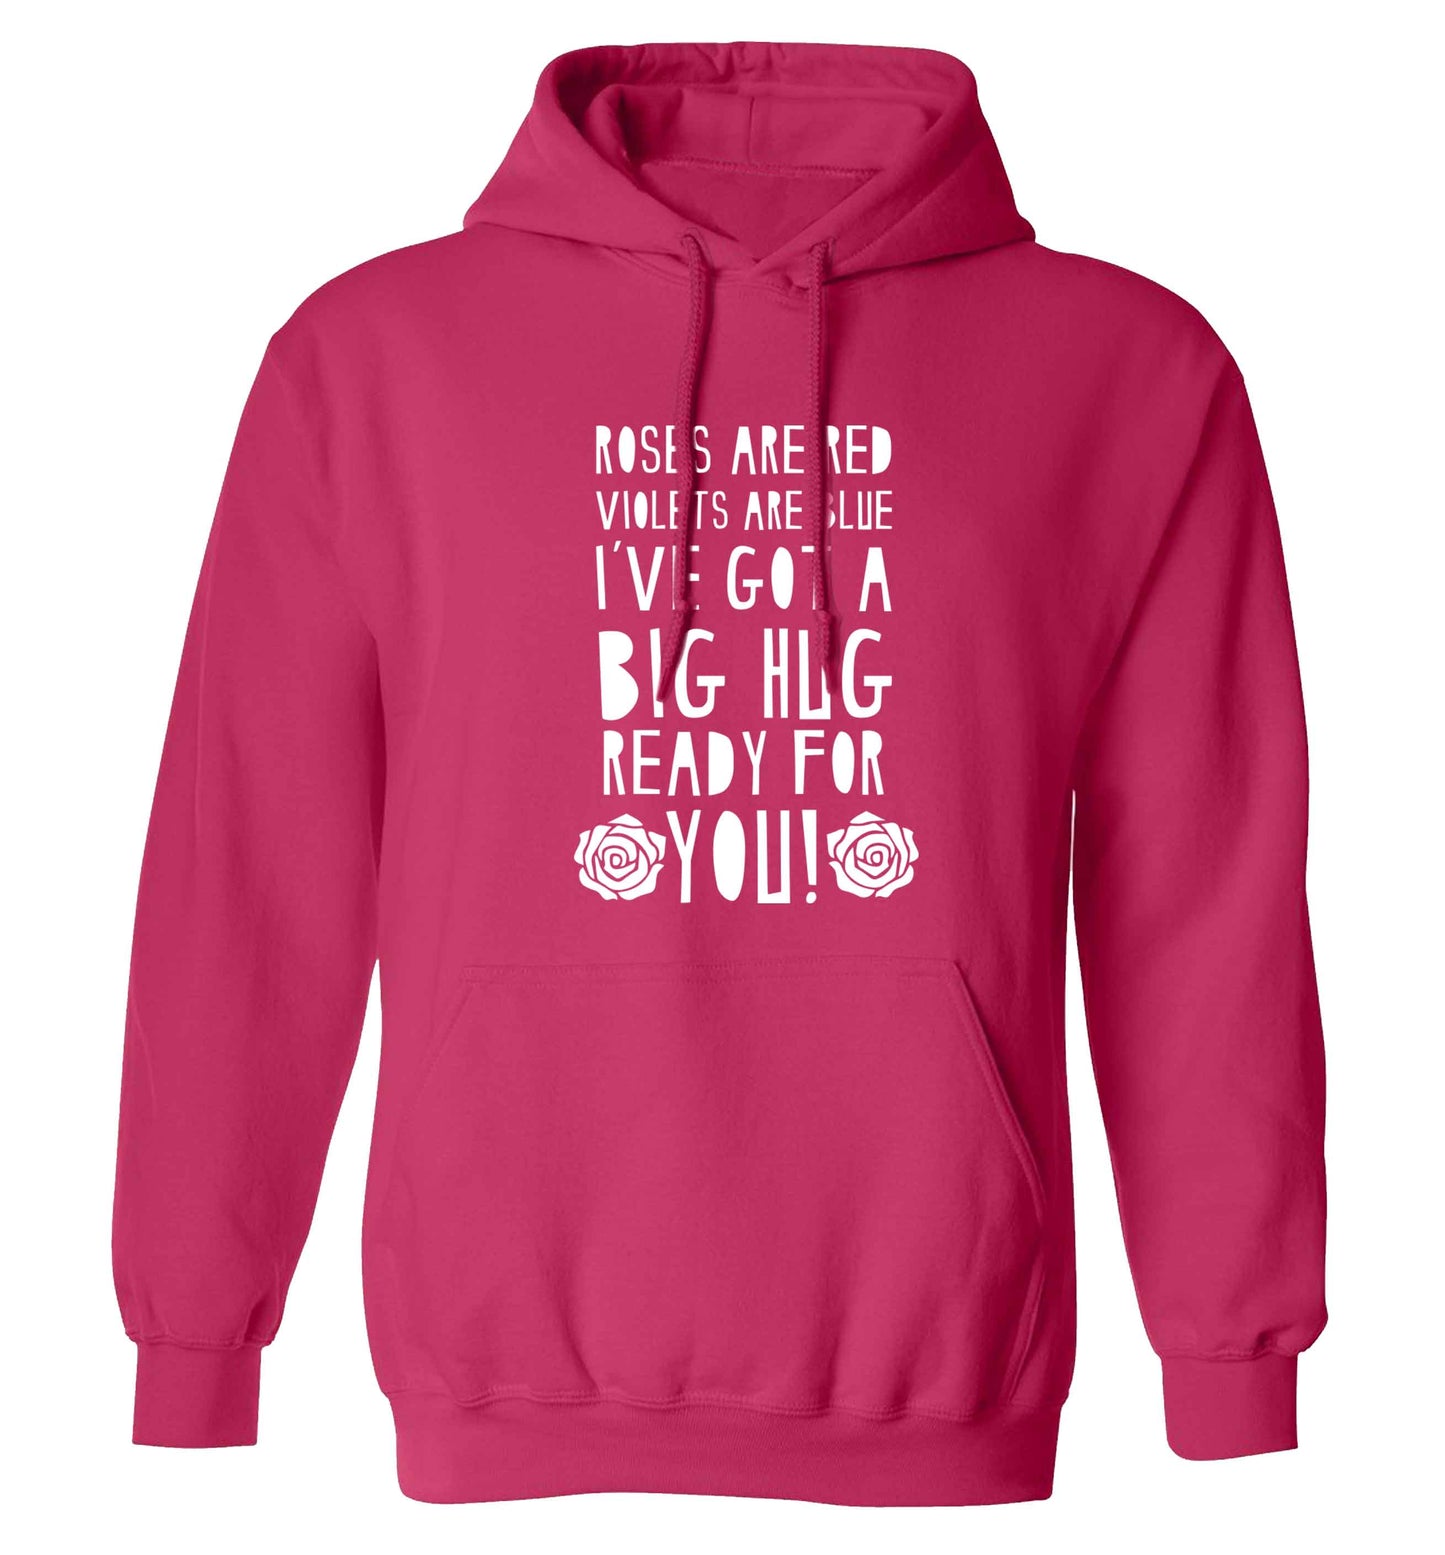 Roses are red violets are blue I've got a big hug coming for you adults unisex pink hoodie 2XL